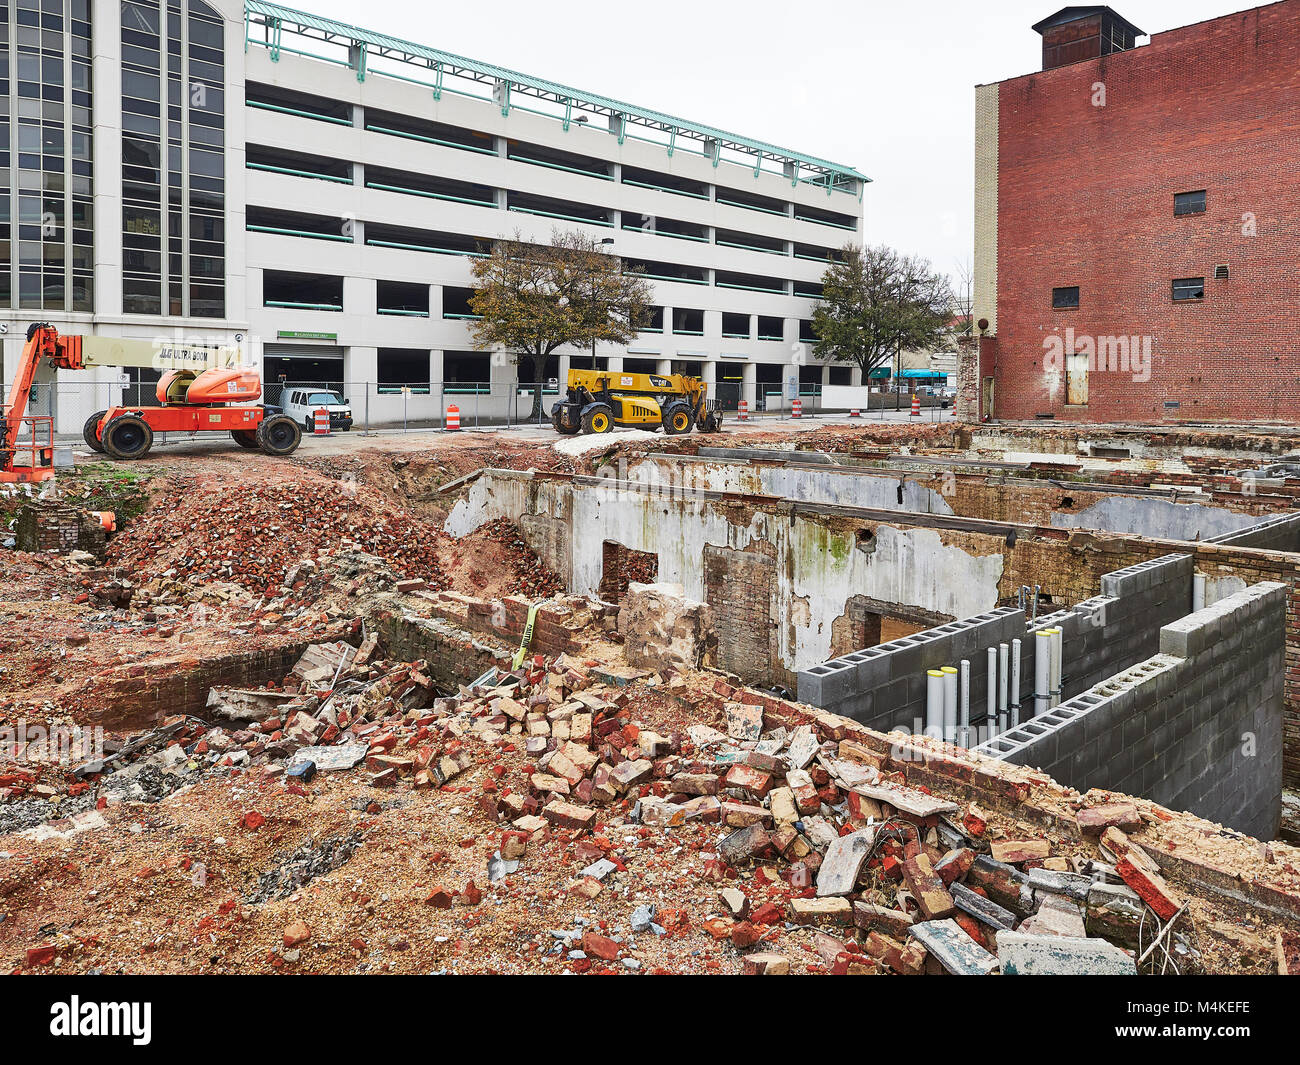 Demolition of an old brick building for remodeling in an urban redevelopment project in downtown Montgomery, Alabama USA. Stock Photo